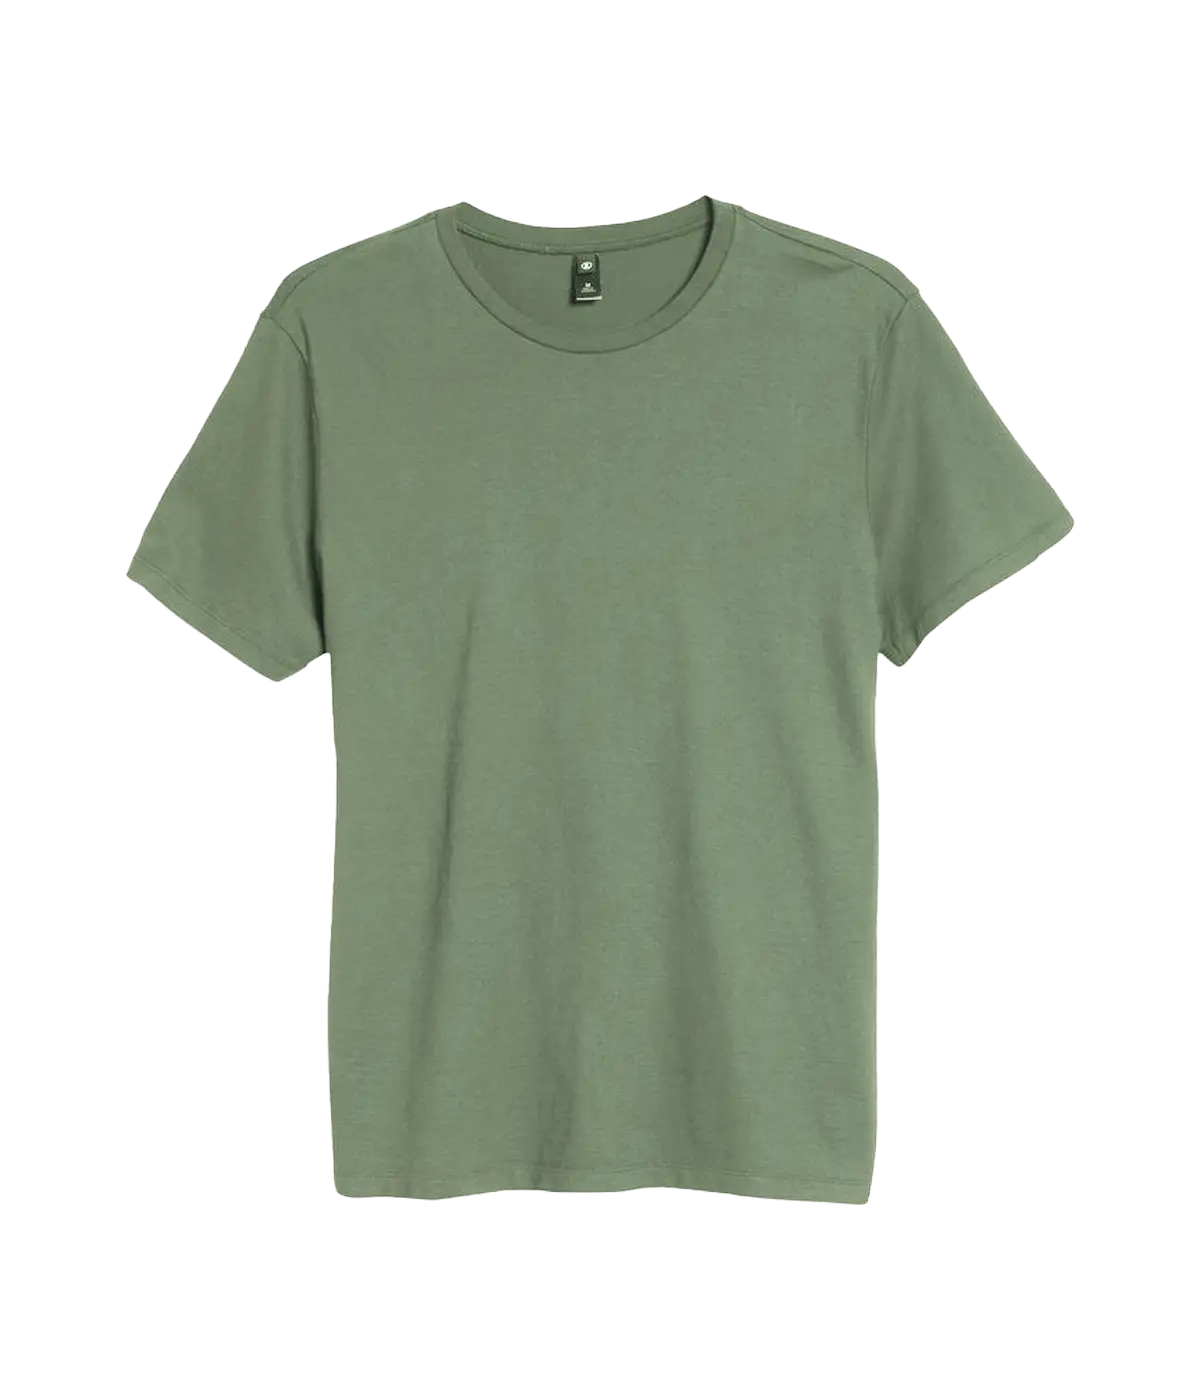 Bryce Crew in Vintage Infantry Green